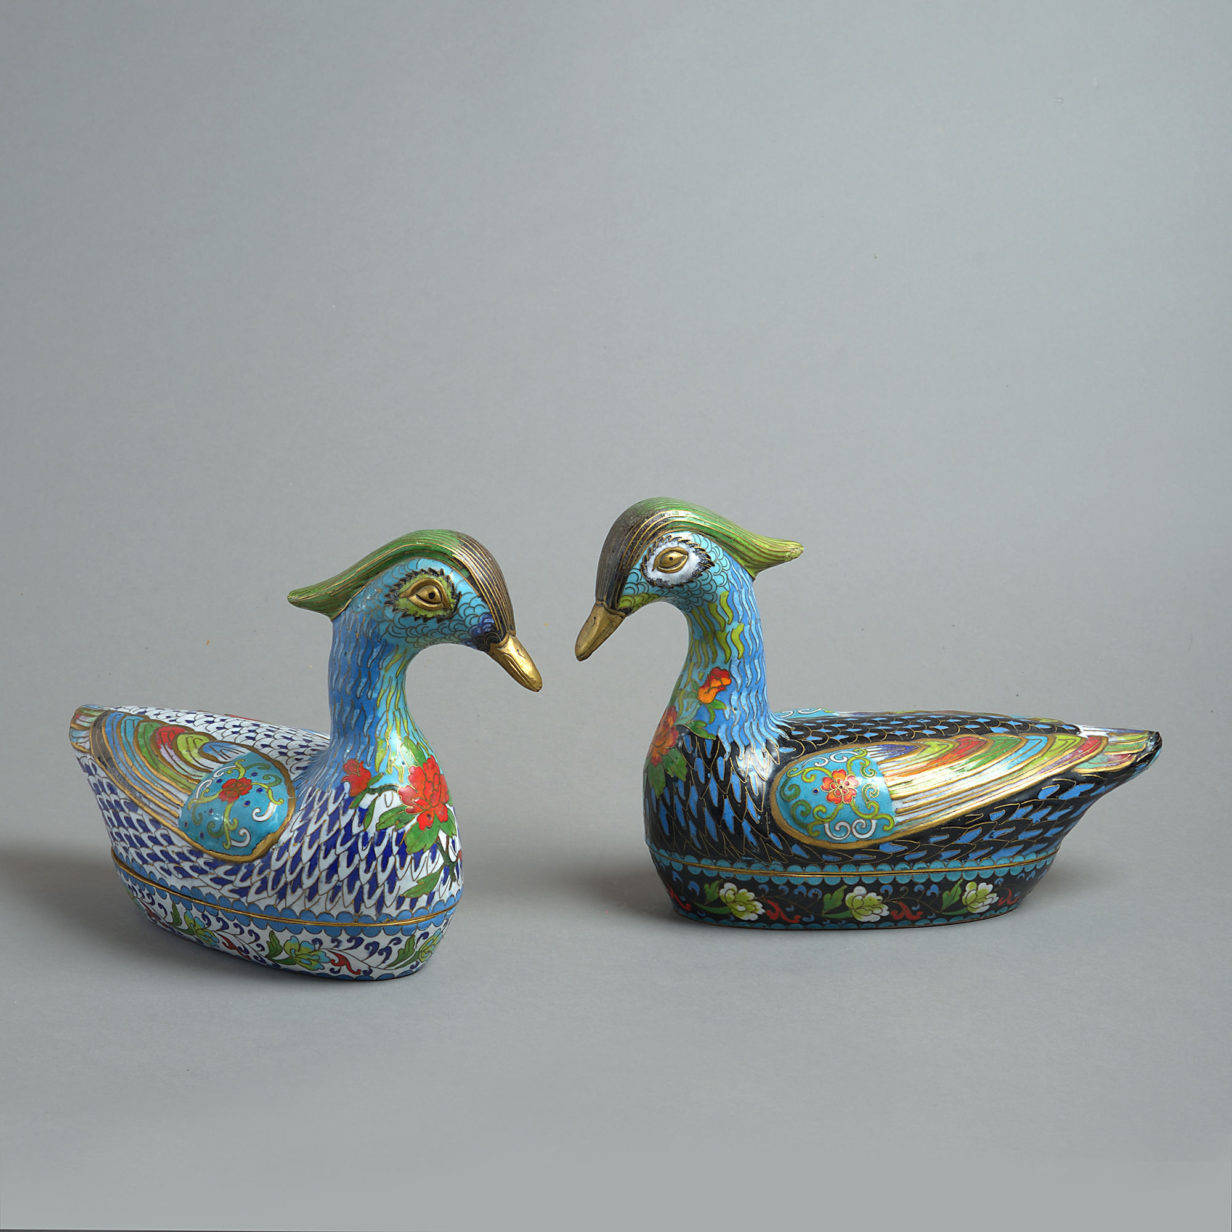 Late 19th century pair of large scale cloisonné duck boxes